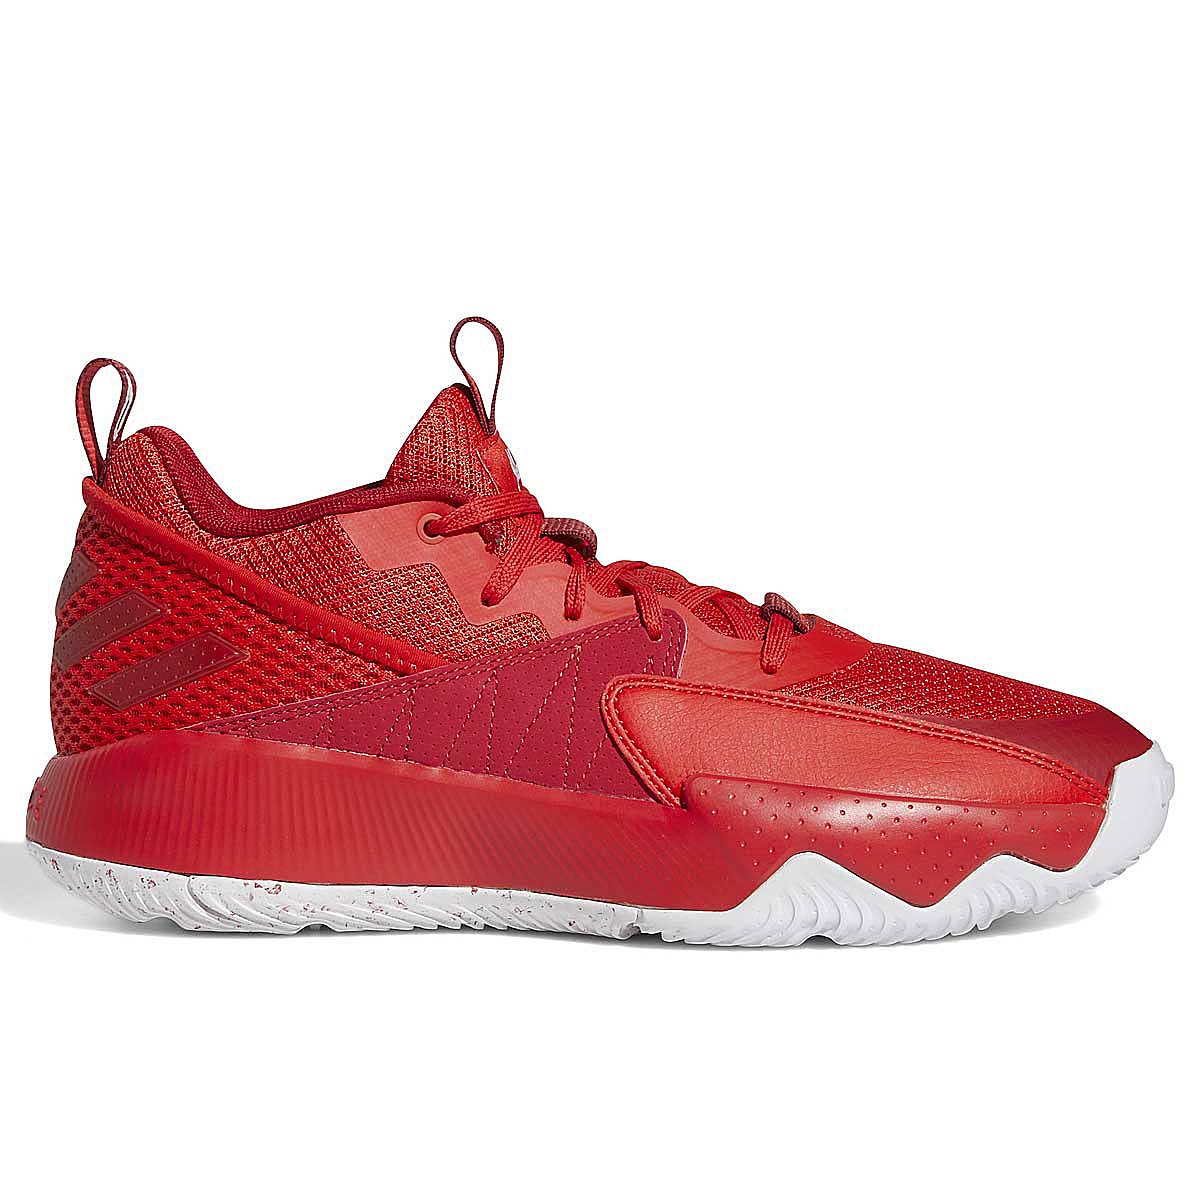 Image of Adidas Dame Certified, Red/brired/tmpwrd